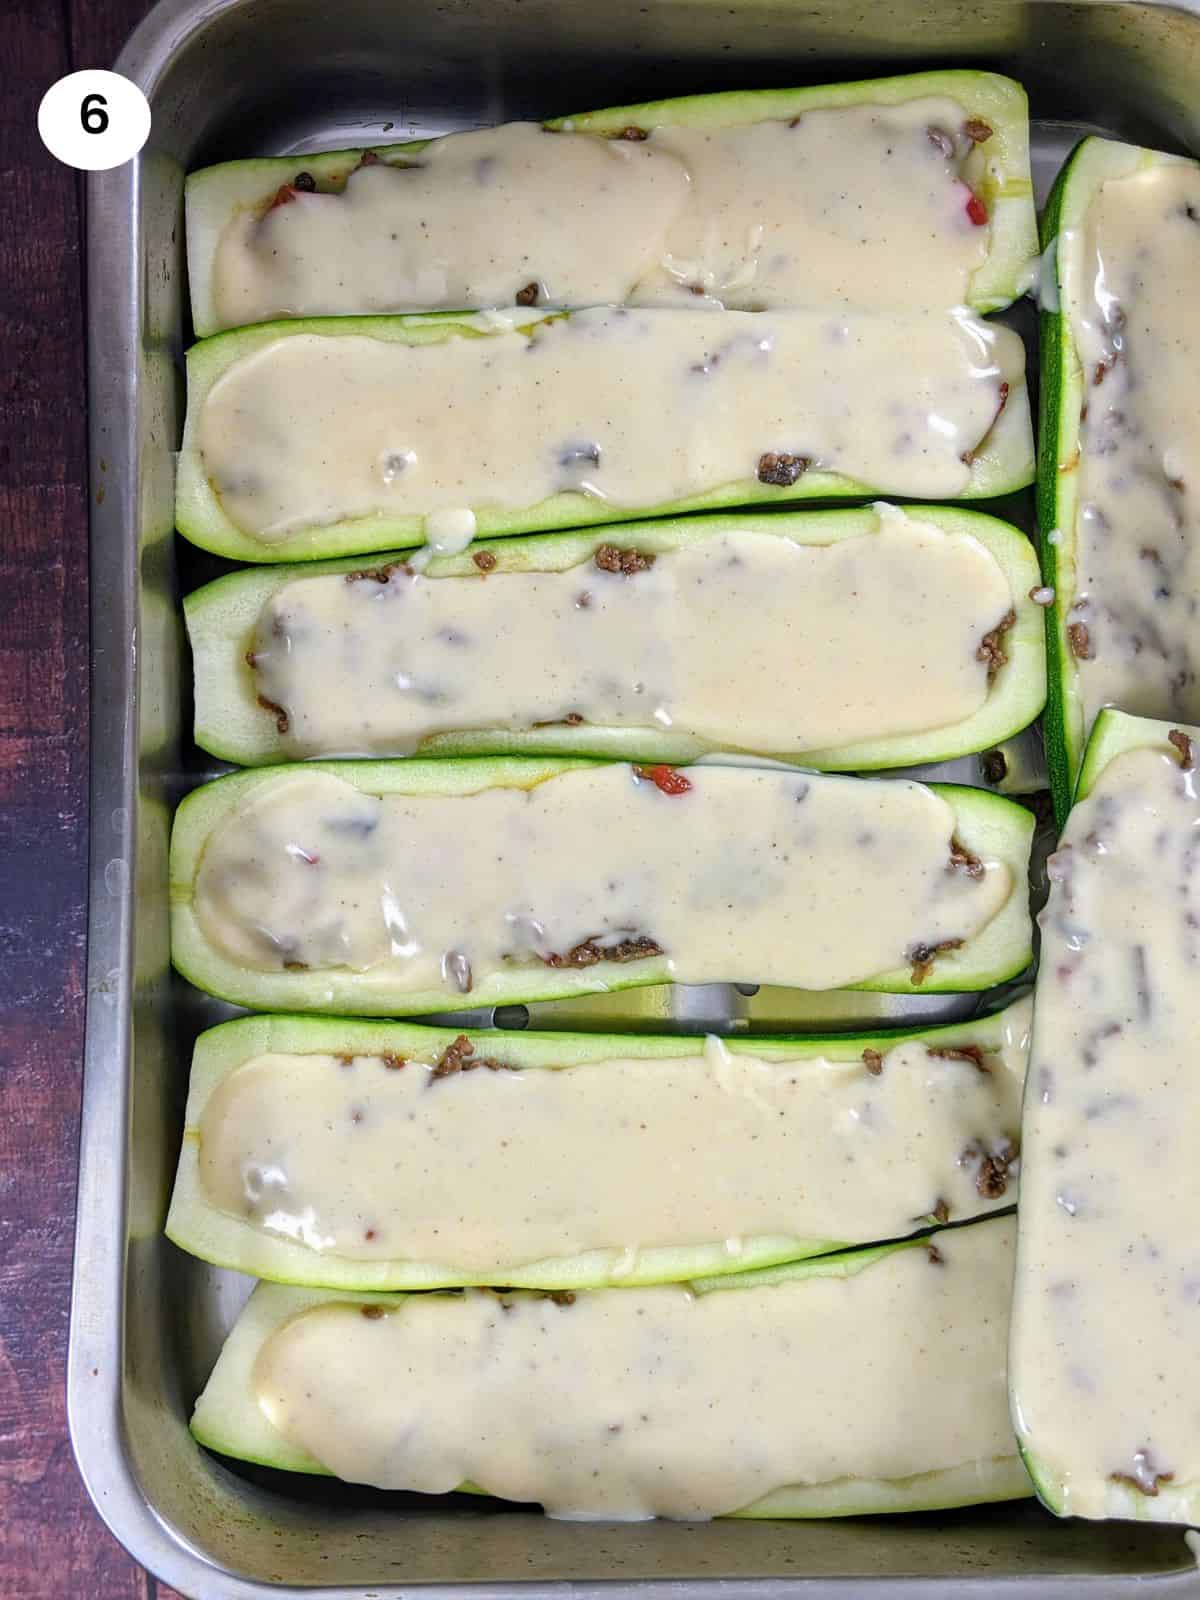 Stuffed zucchini boats with ground beef filling and bechamel sauce on top.